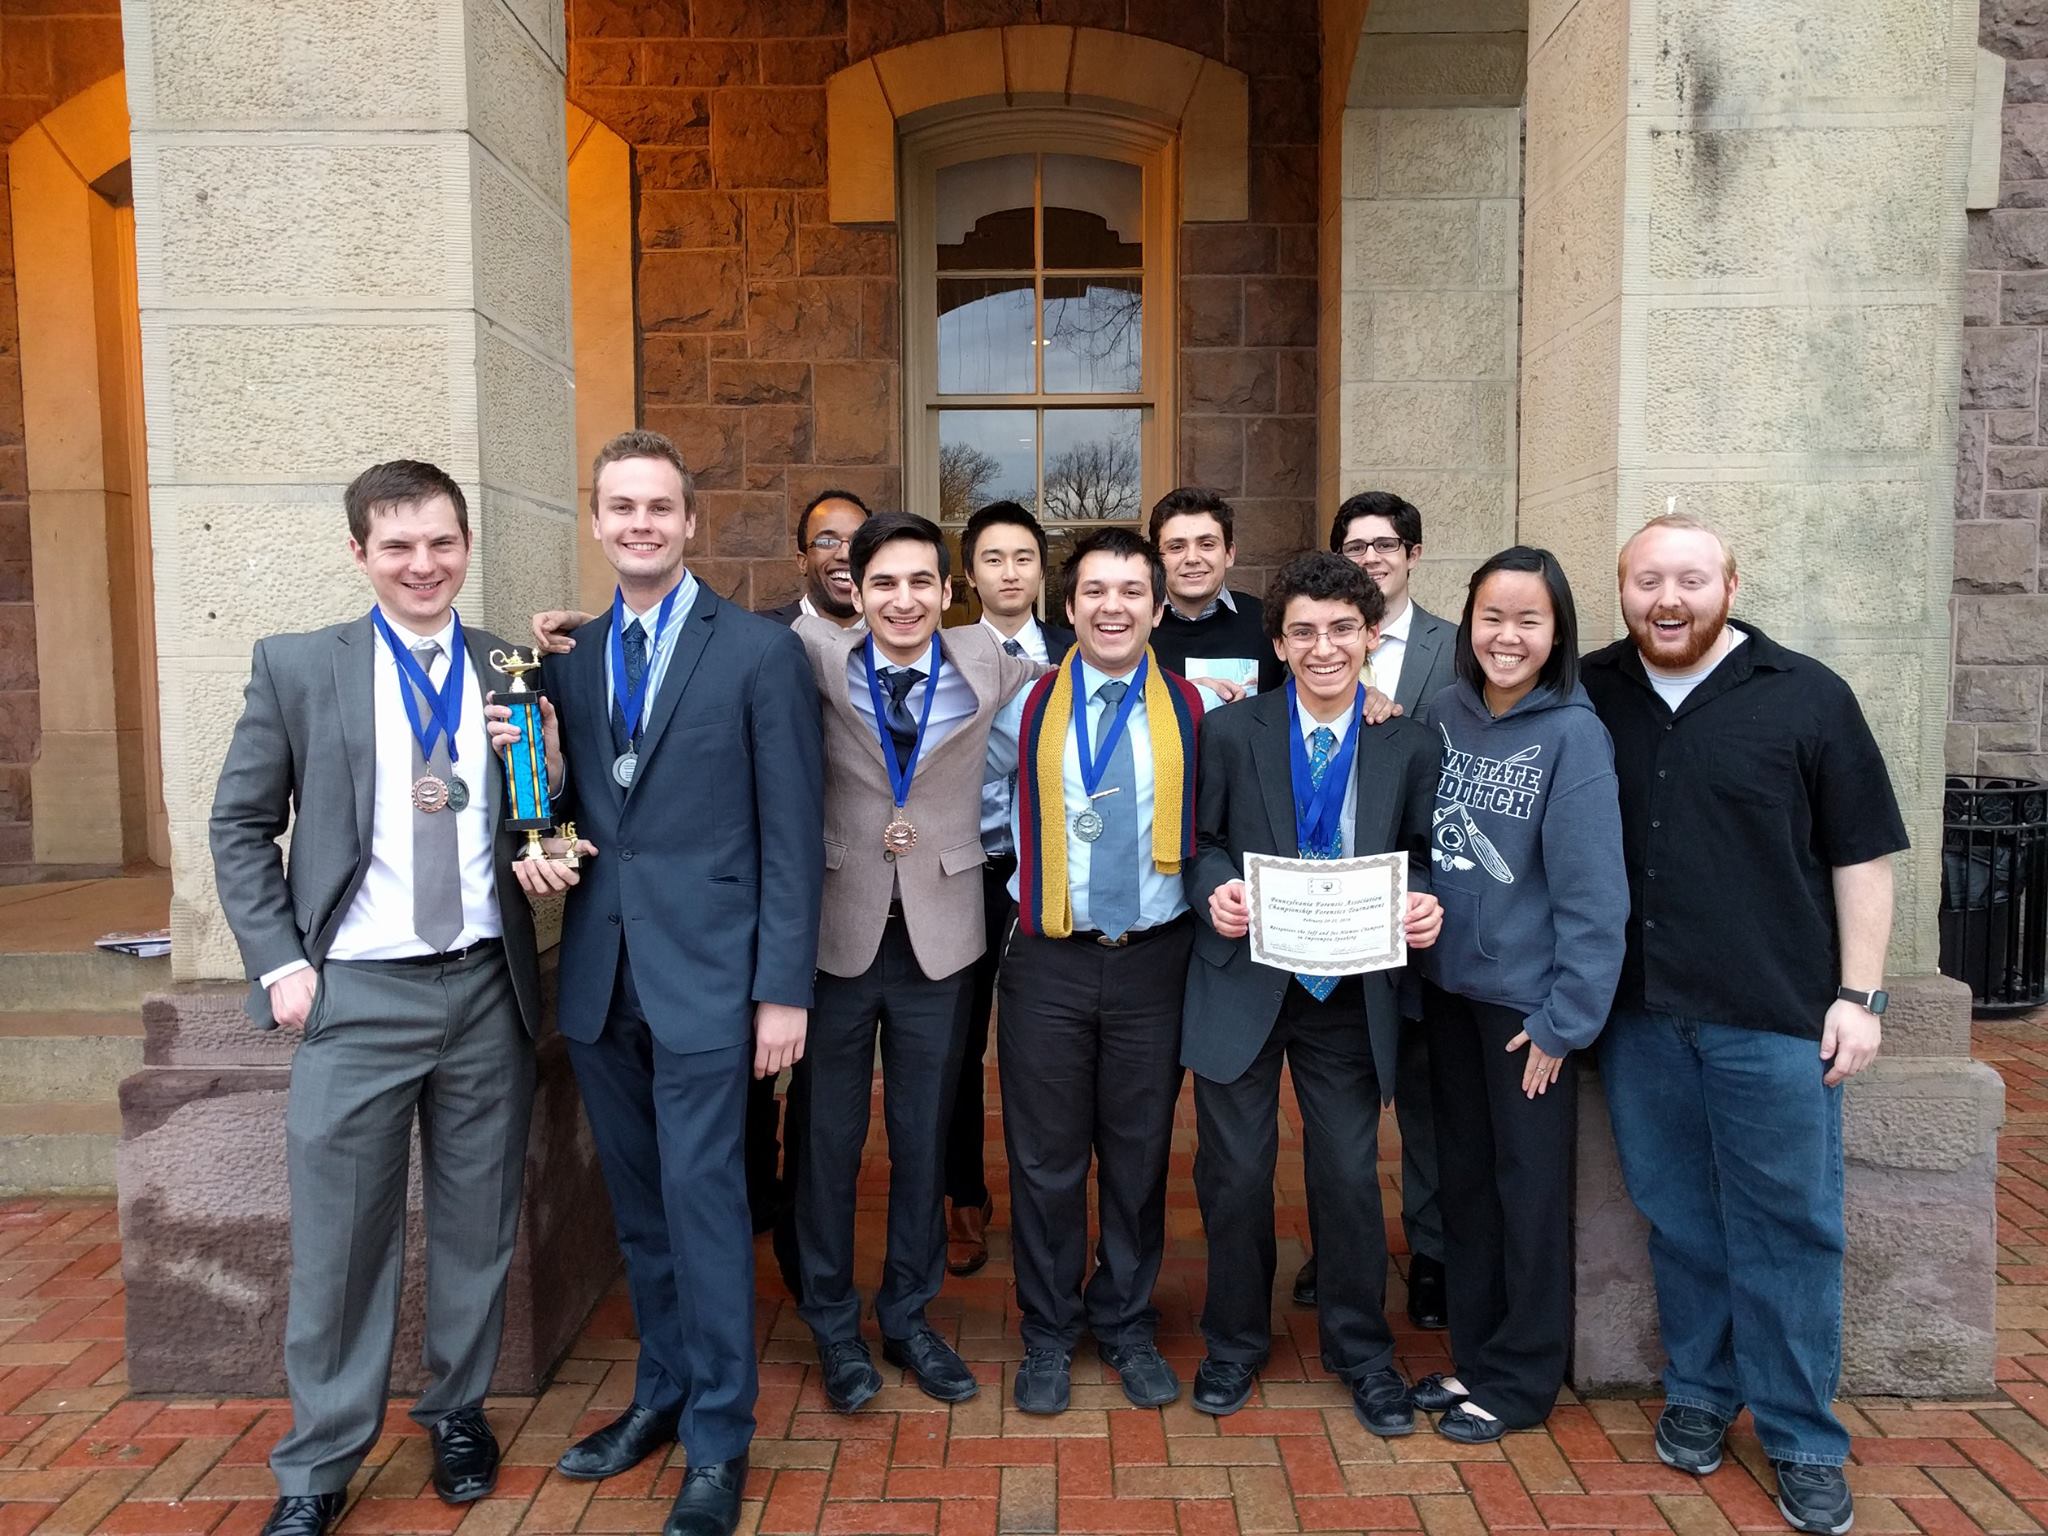 Penn State Speech & Debate Society has impressive showing at state championships